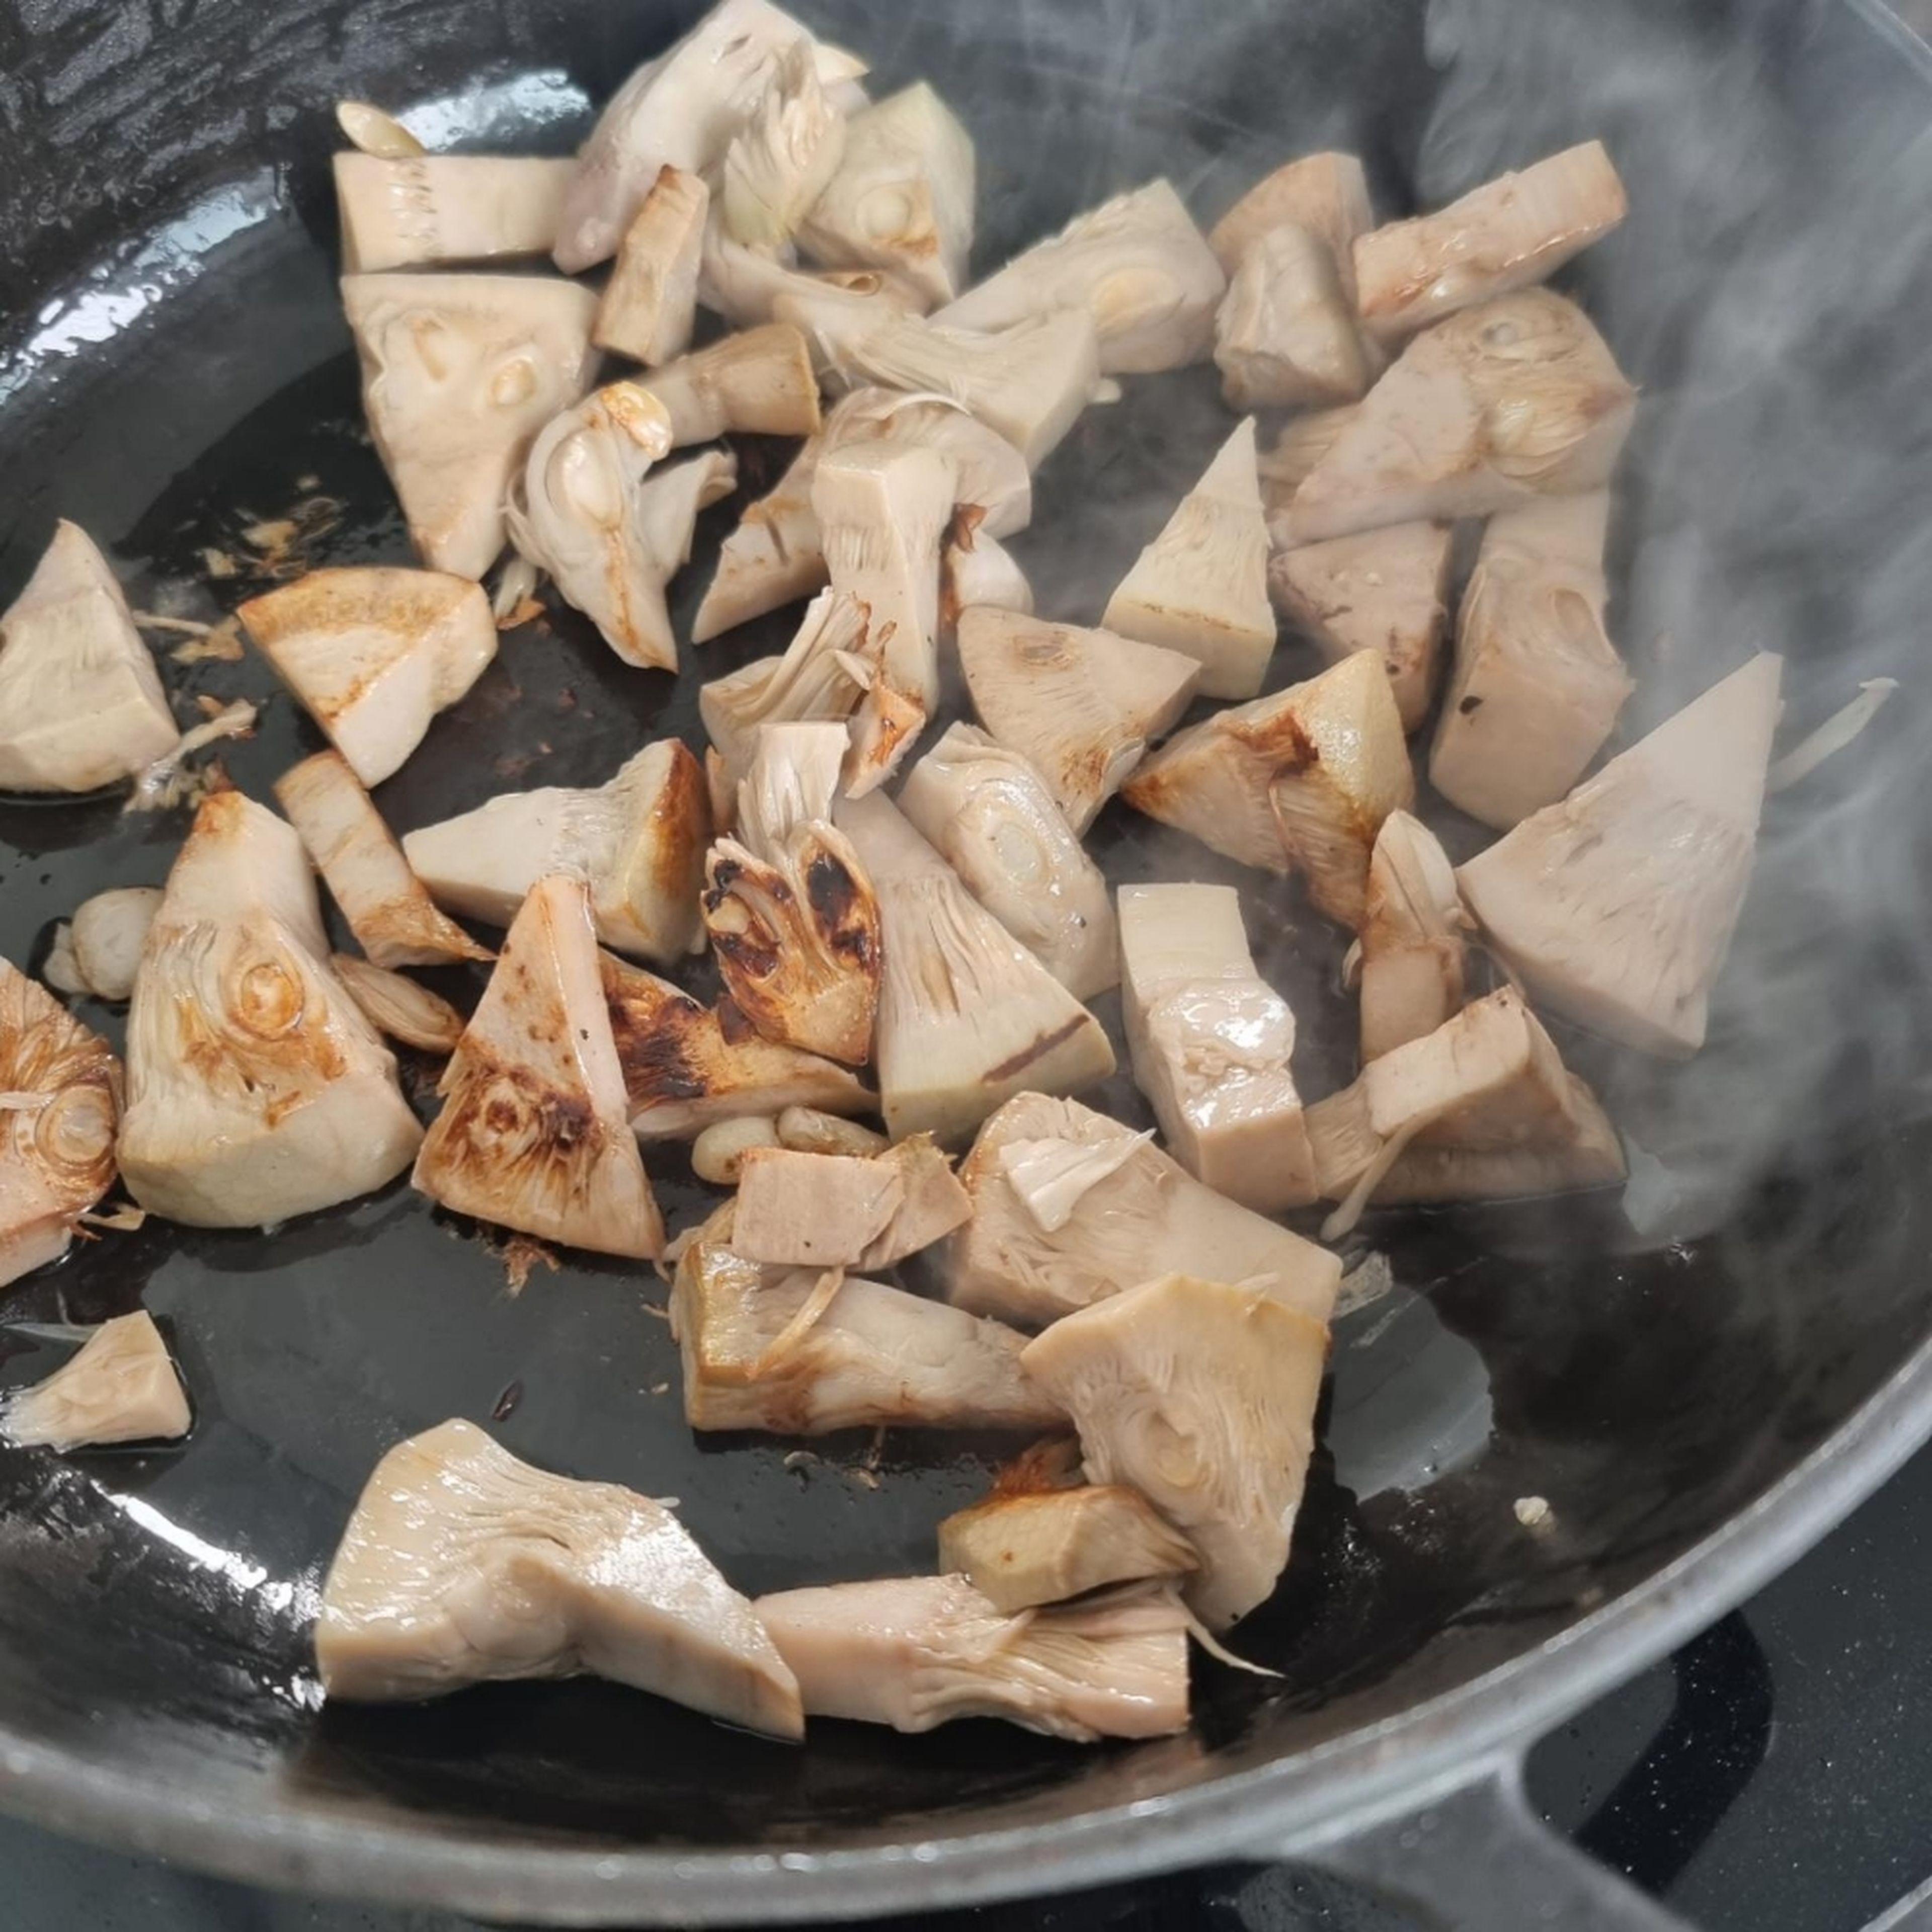 Place a large pot or roaster and heat. Add oil and sharply fry the jackfruit.